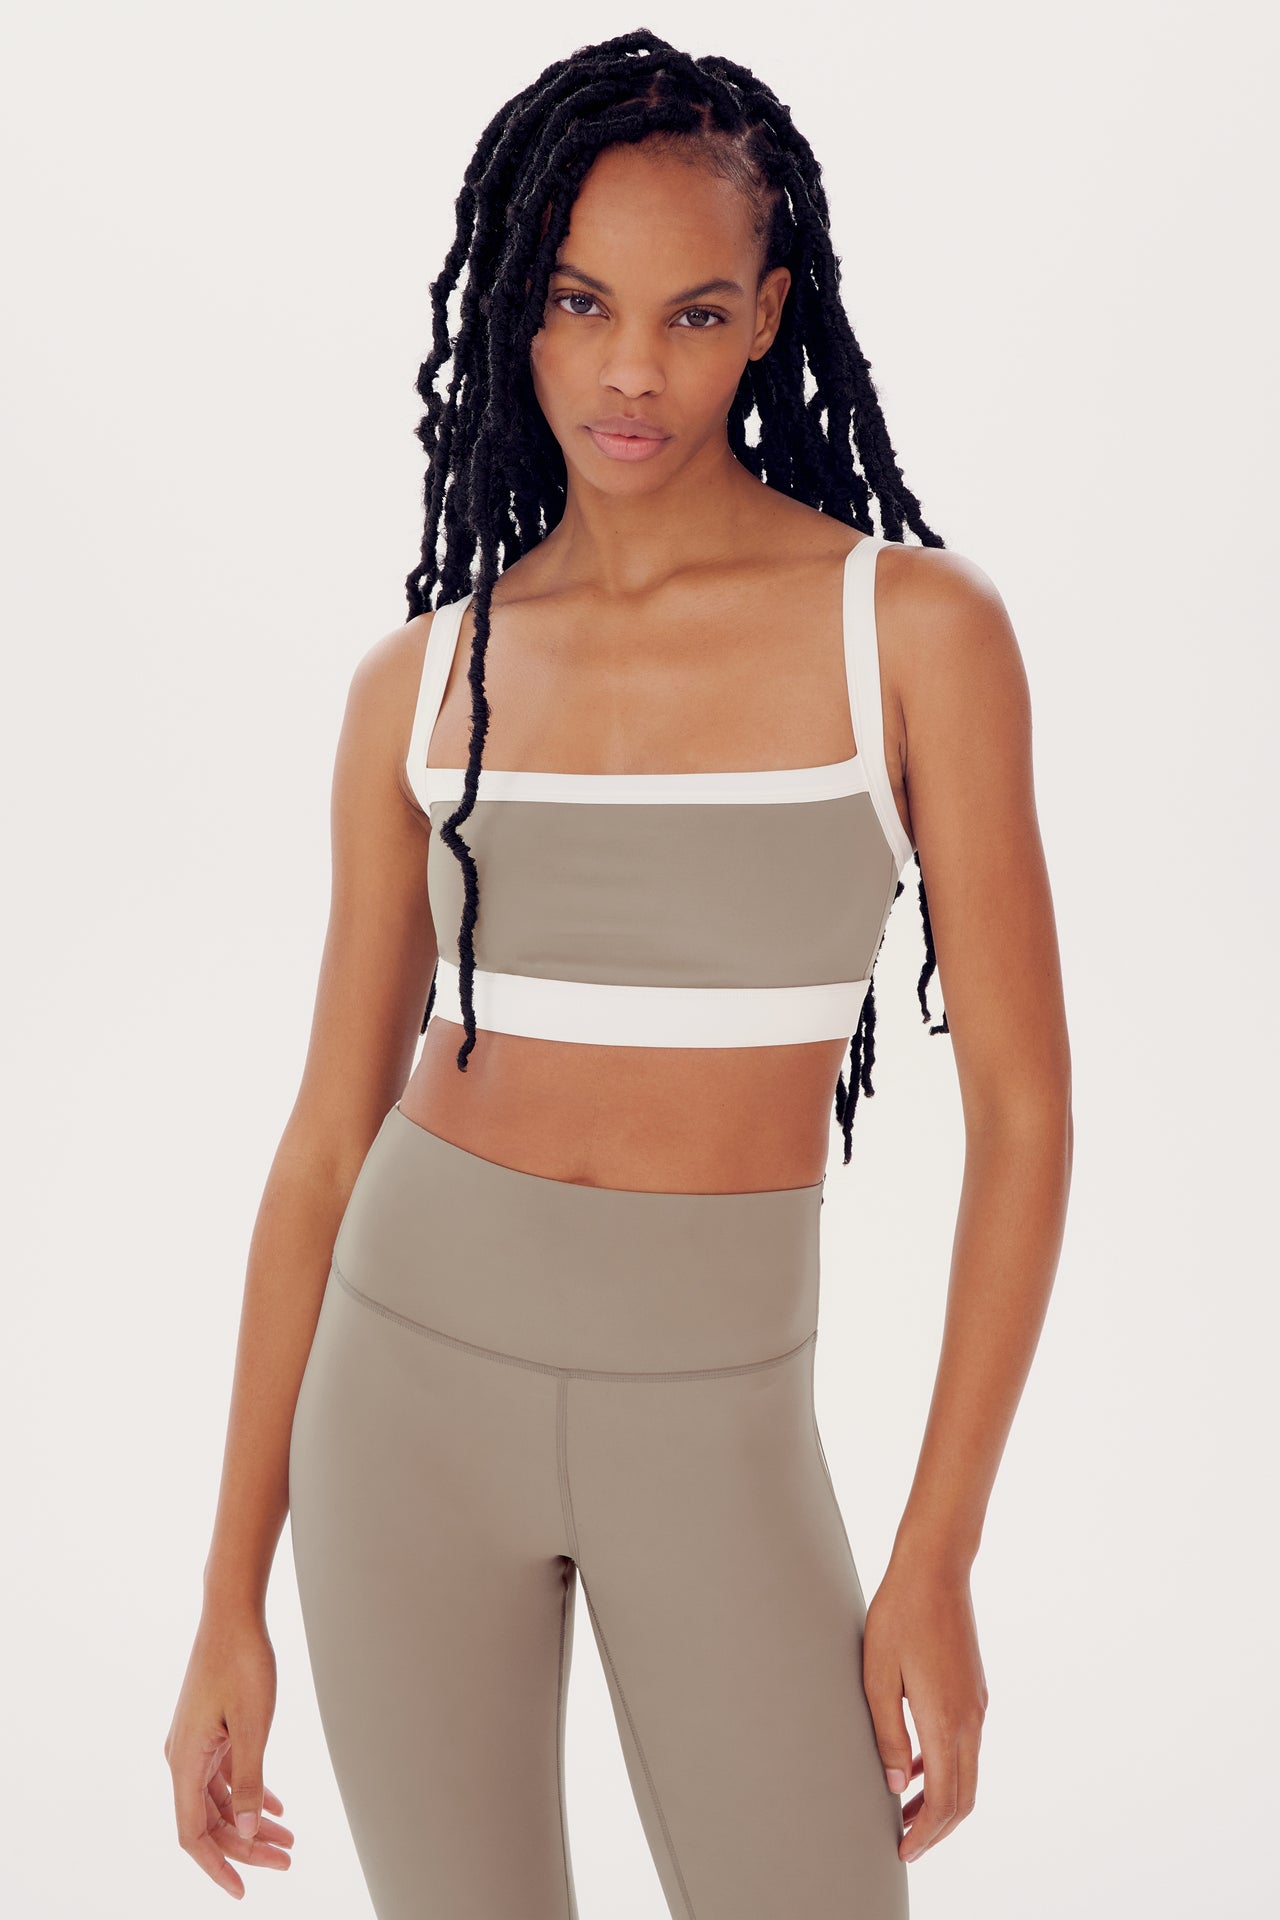 A woman with long braided hair wearing a SPLITS59 Monah Rigor Bra in Latte/White and beige leggings, standing against a white background.